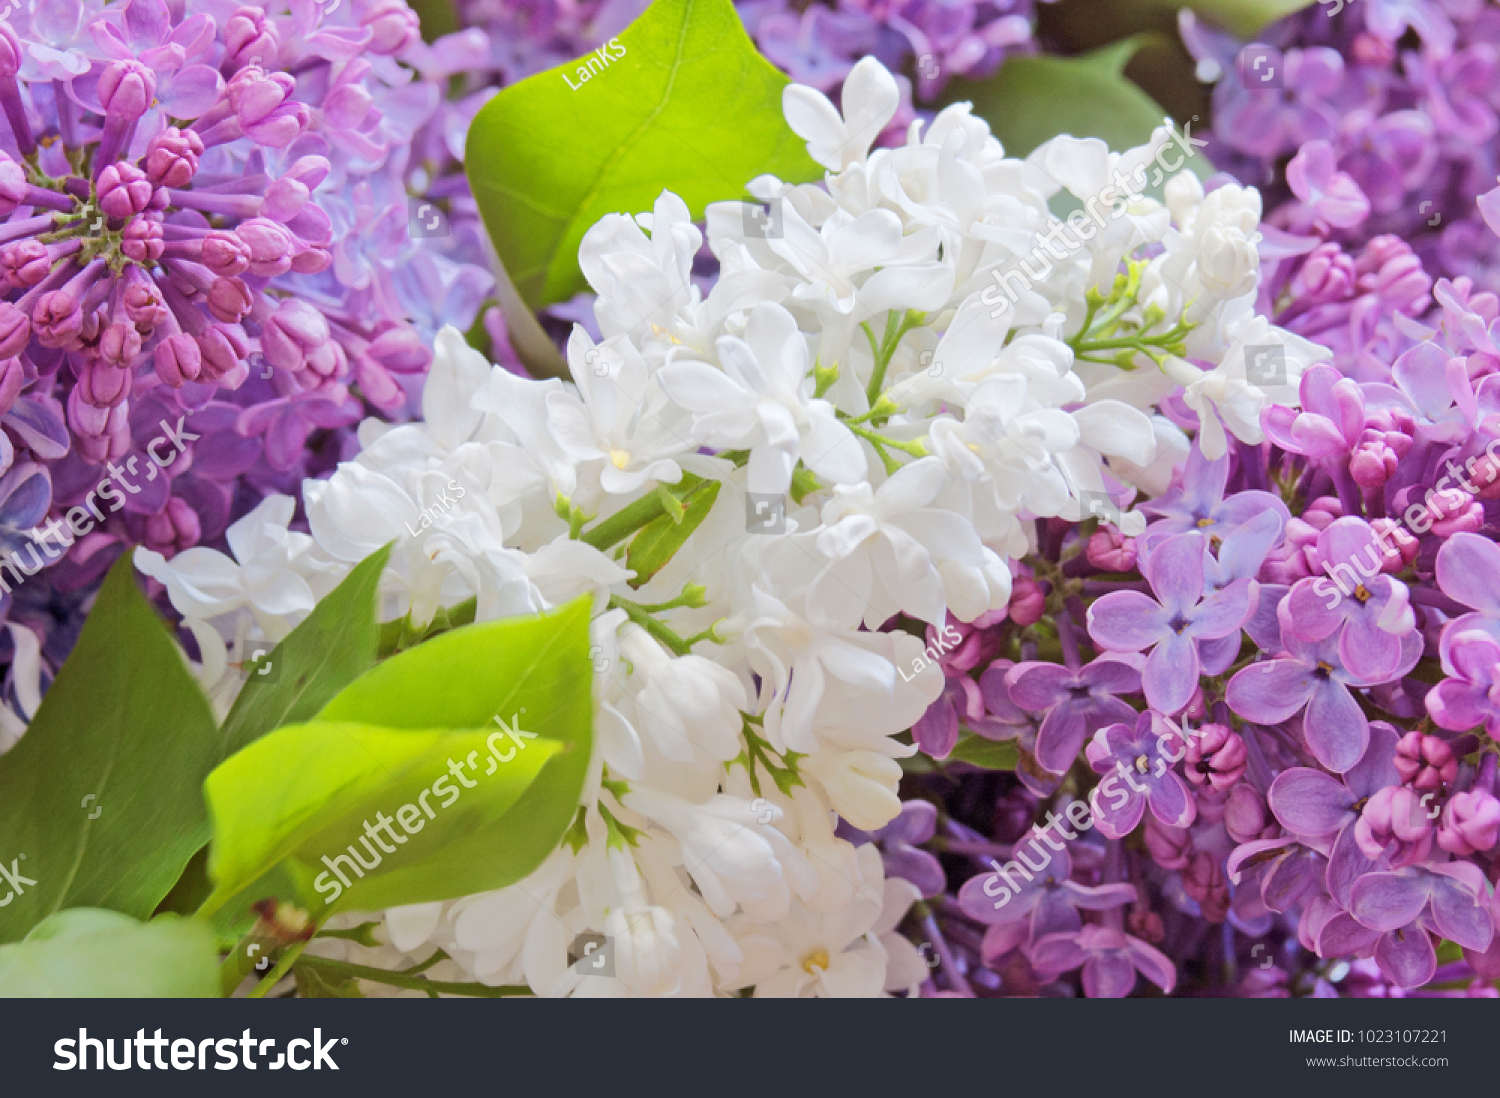 Lilac flowers background #1023107221